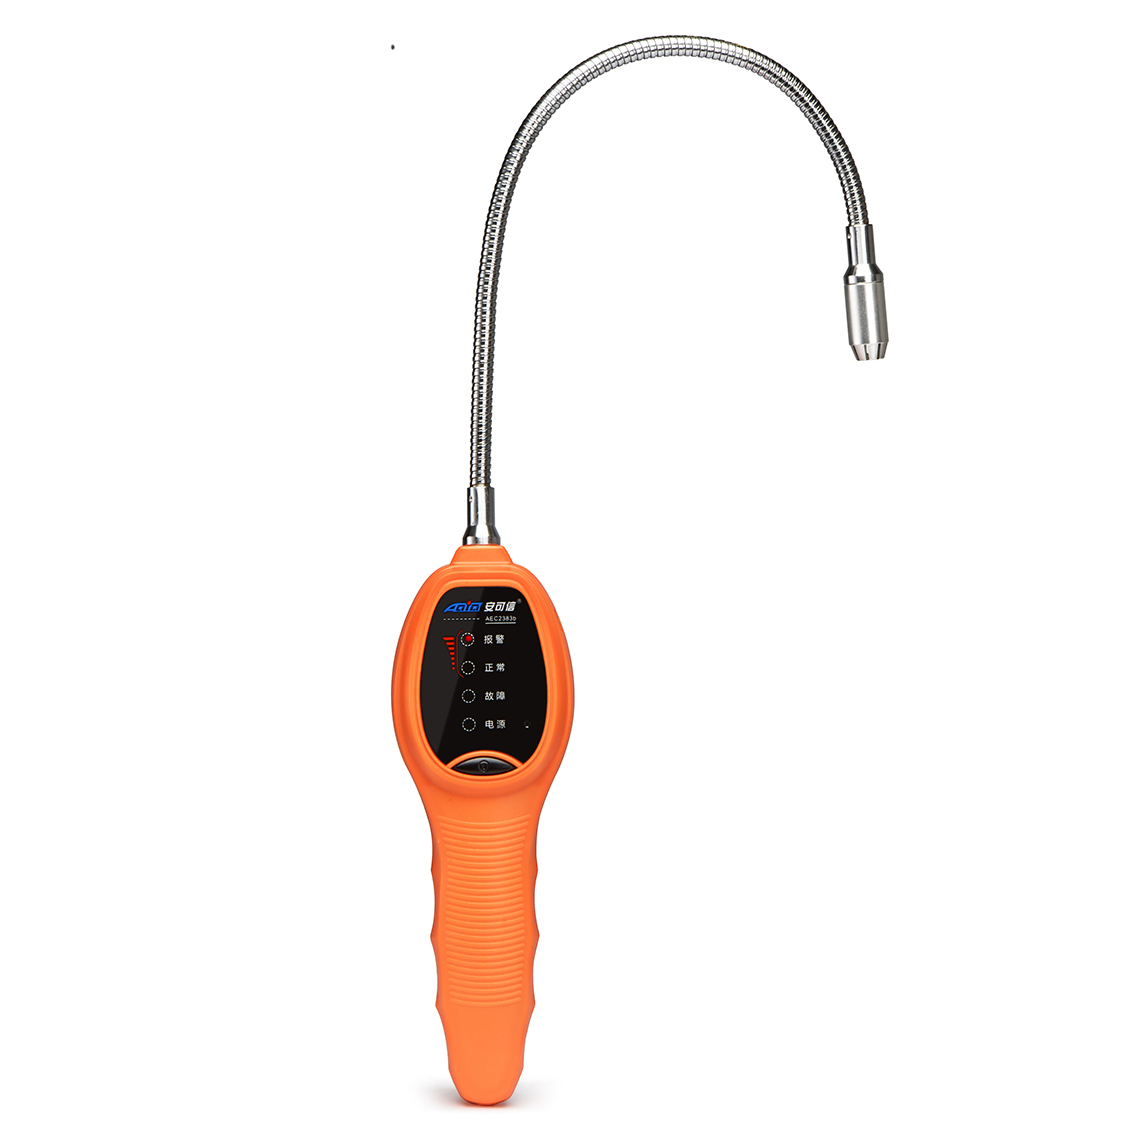 BT-AEC2383b Portable Single Gas Detector Featured Image